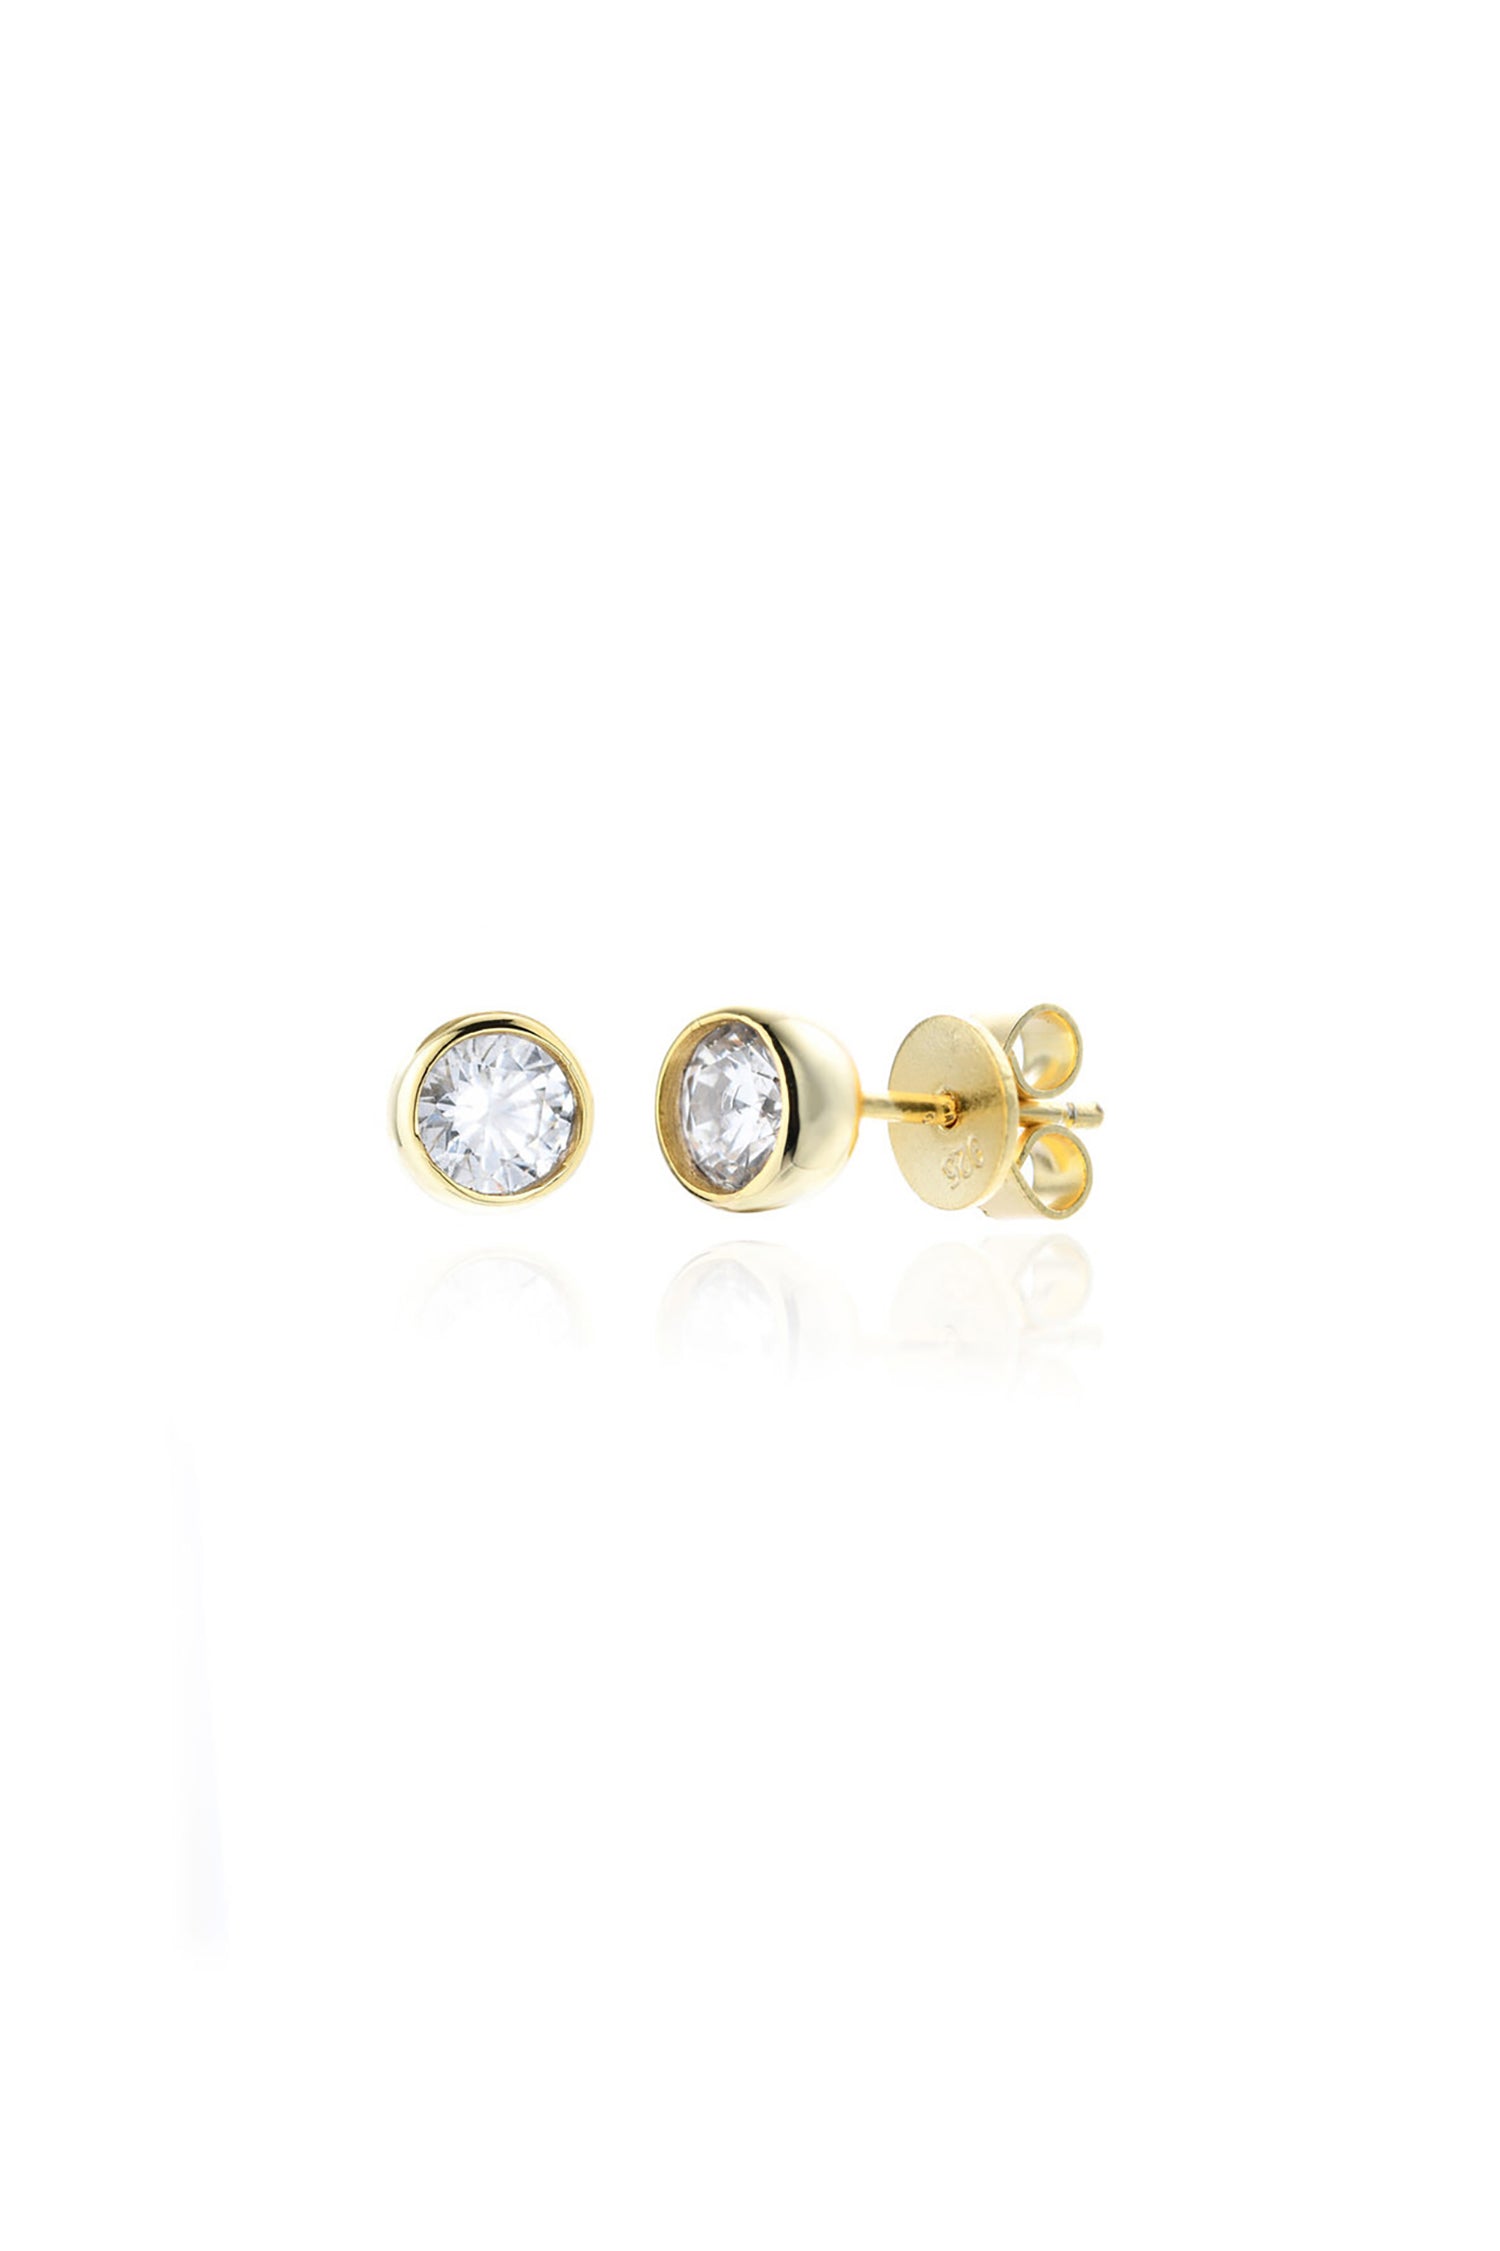  Single Dimaond Cut White Crystal Stud Earrings 14k Gold Plated Sterling Silver White Background